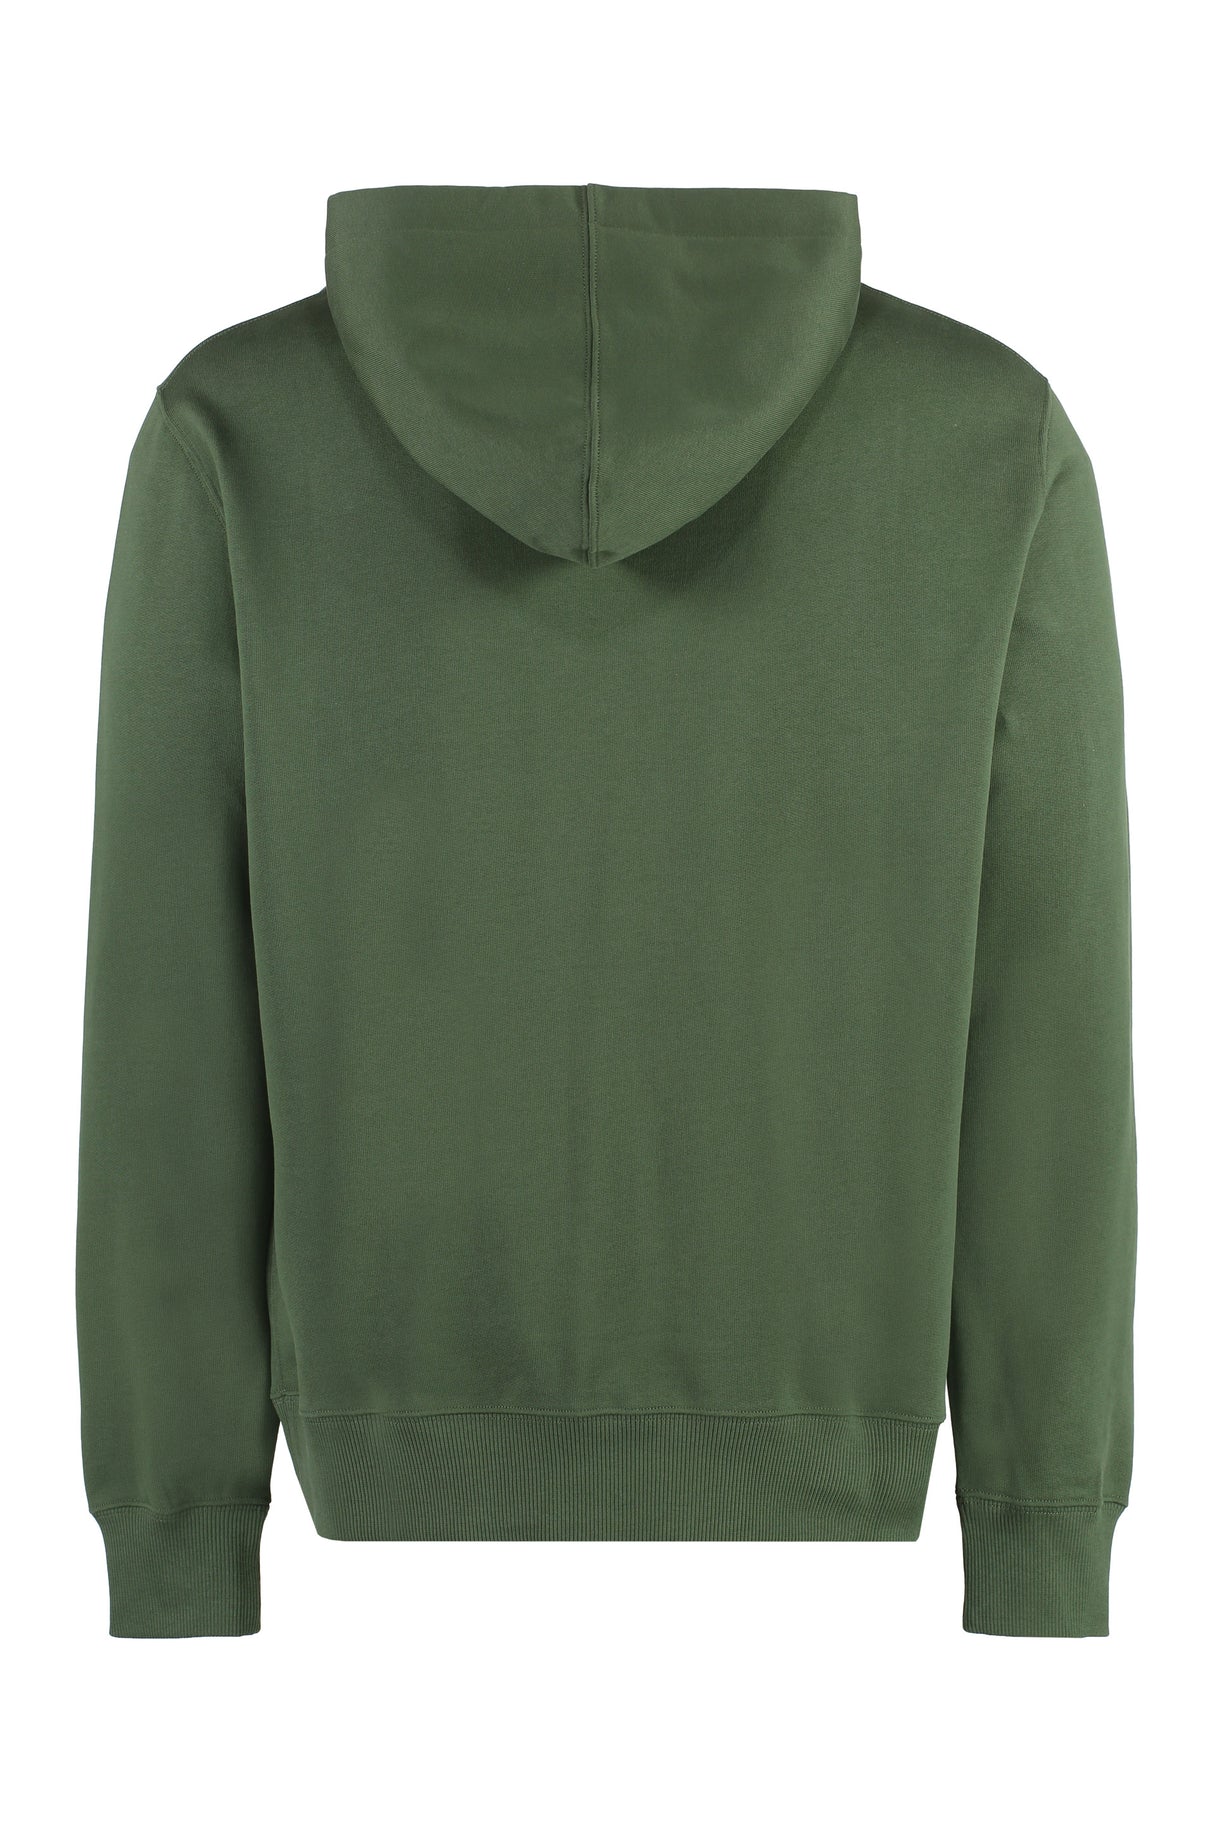 ETRO Green Cotton Hoodie for Men - FW23 Collection